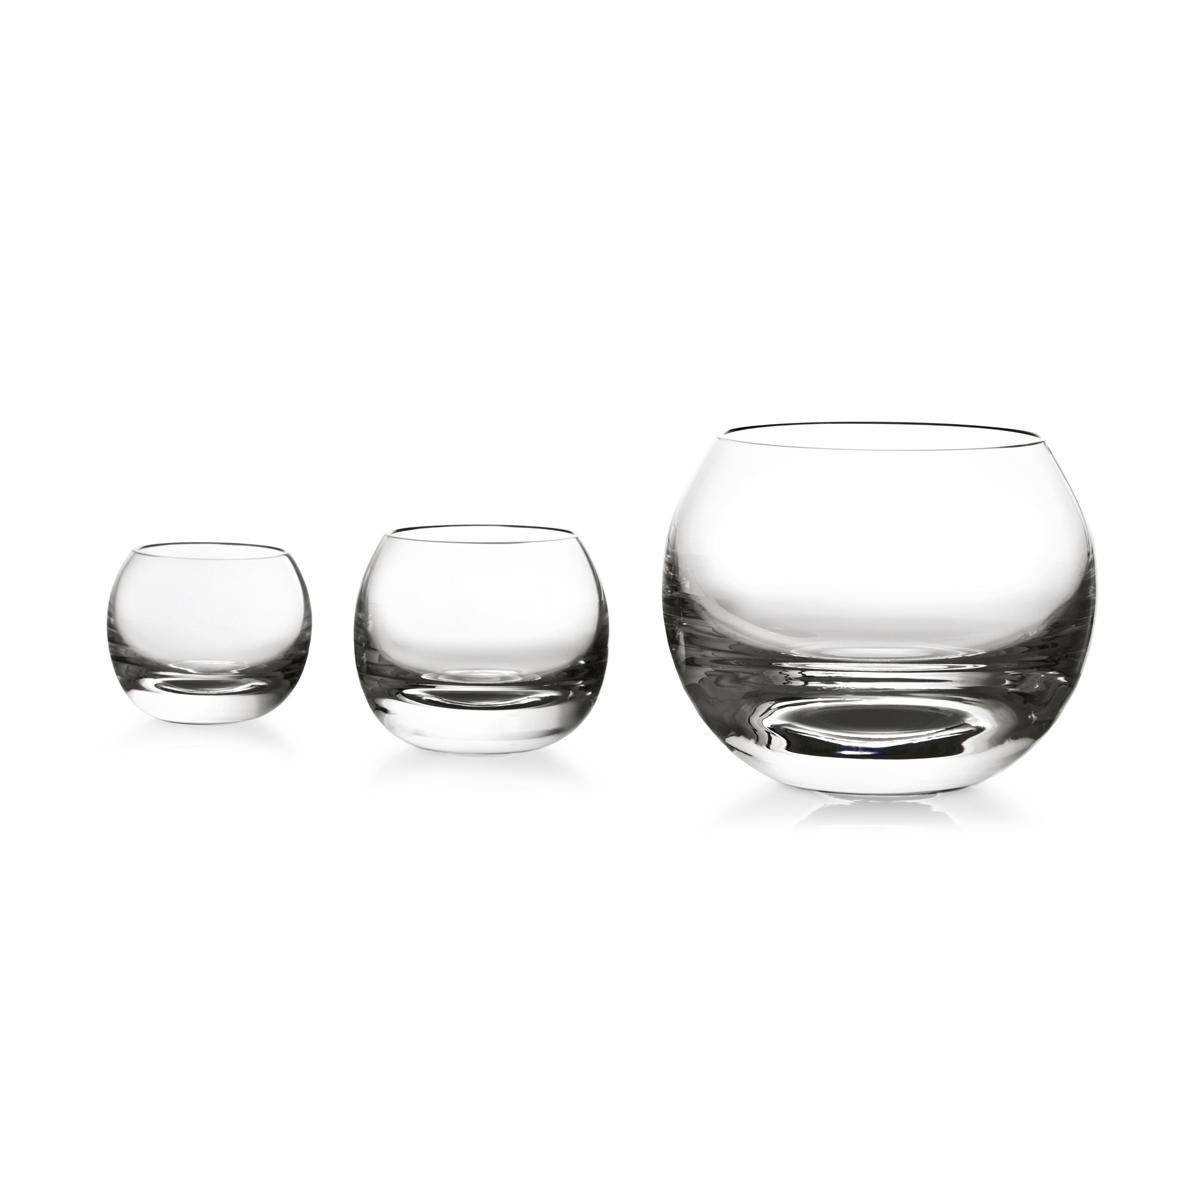 Whisky glass made in blown in a mold glass. The Tulip collection is a glassware family by Aldo Cibic, who designed these pieces walking the line between classical and postmodern design. The boldly simple geometric forms are at once contemporary and